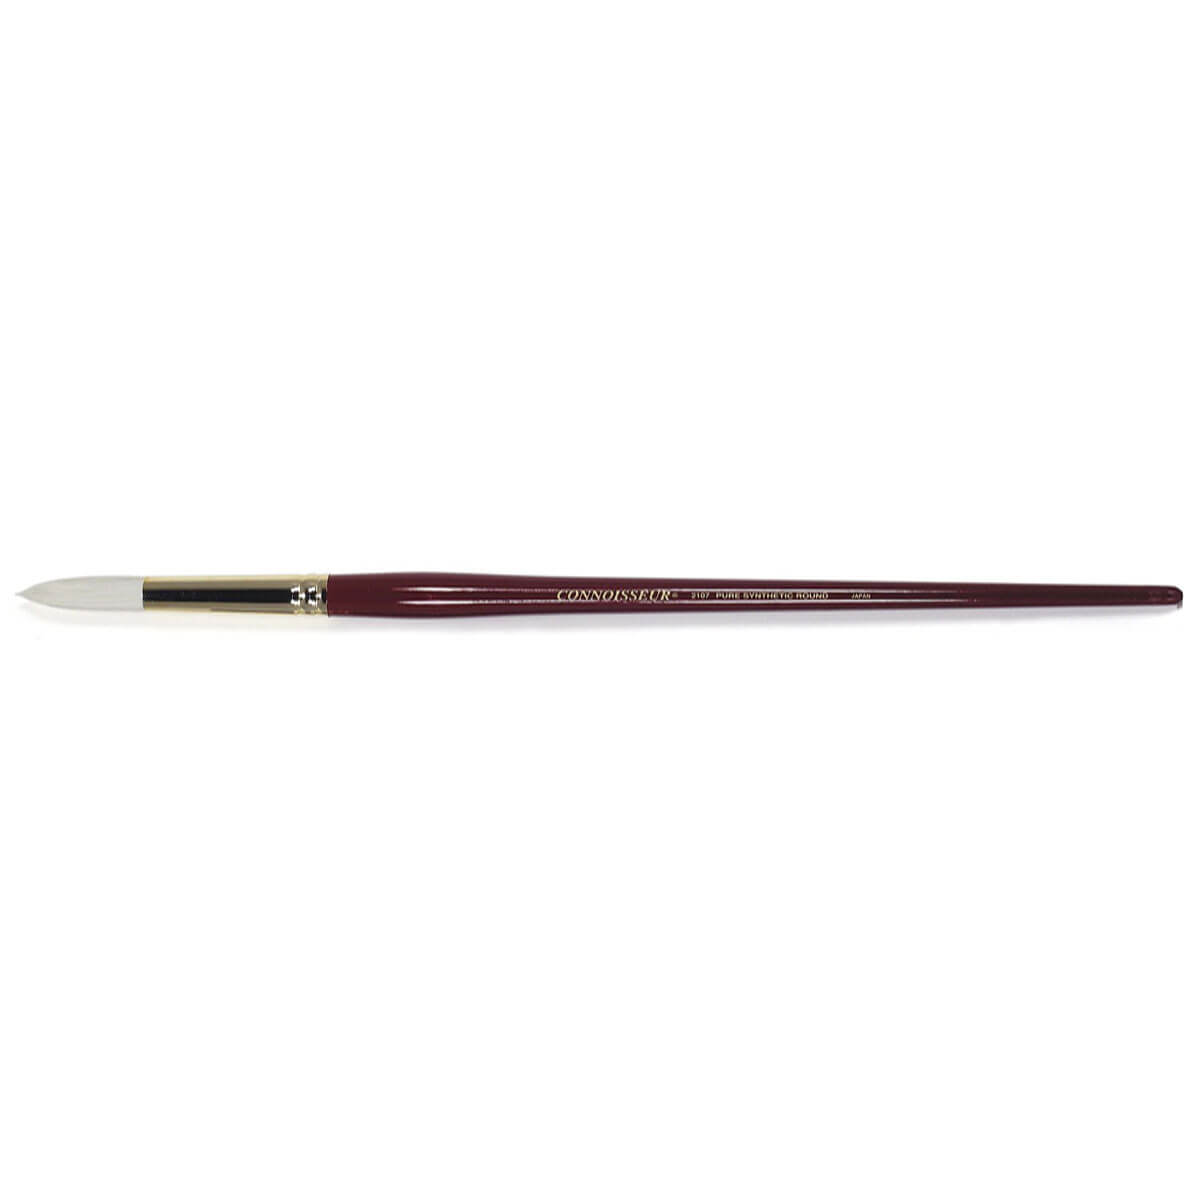 Connoisseur Pure Synthetic Brush Round No6